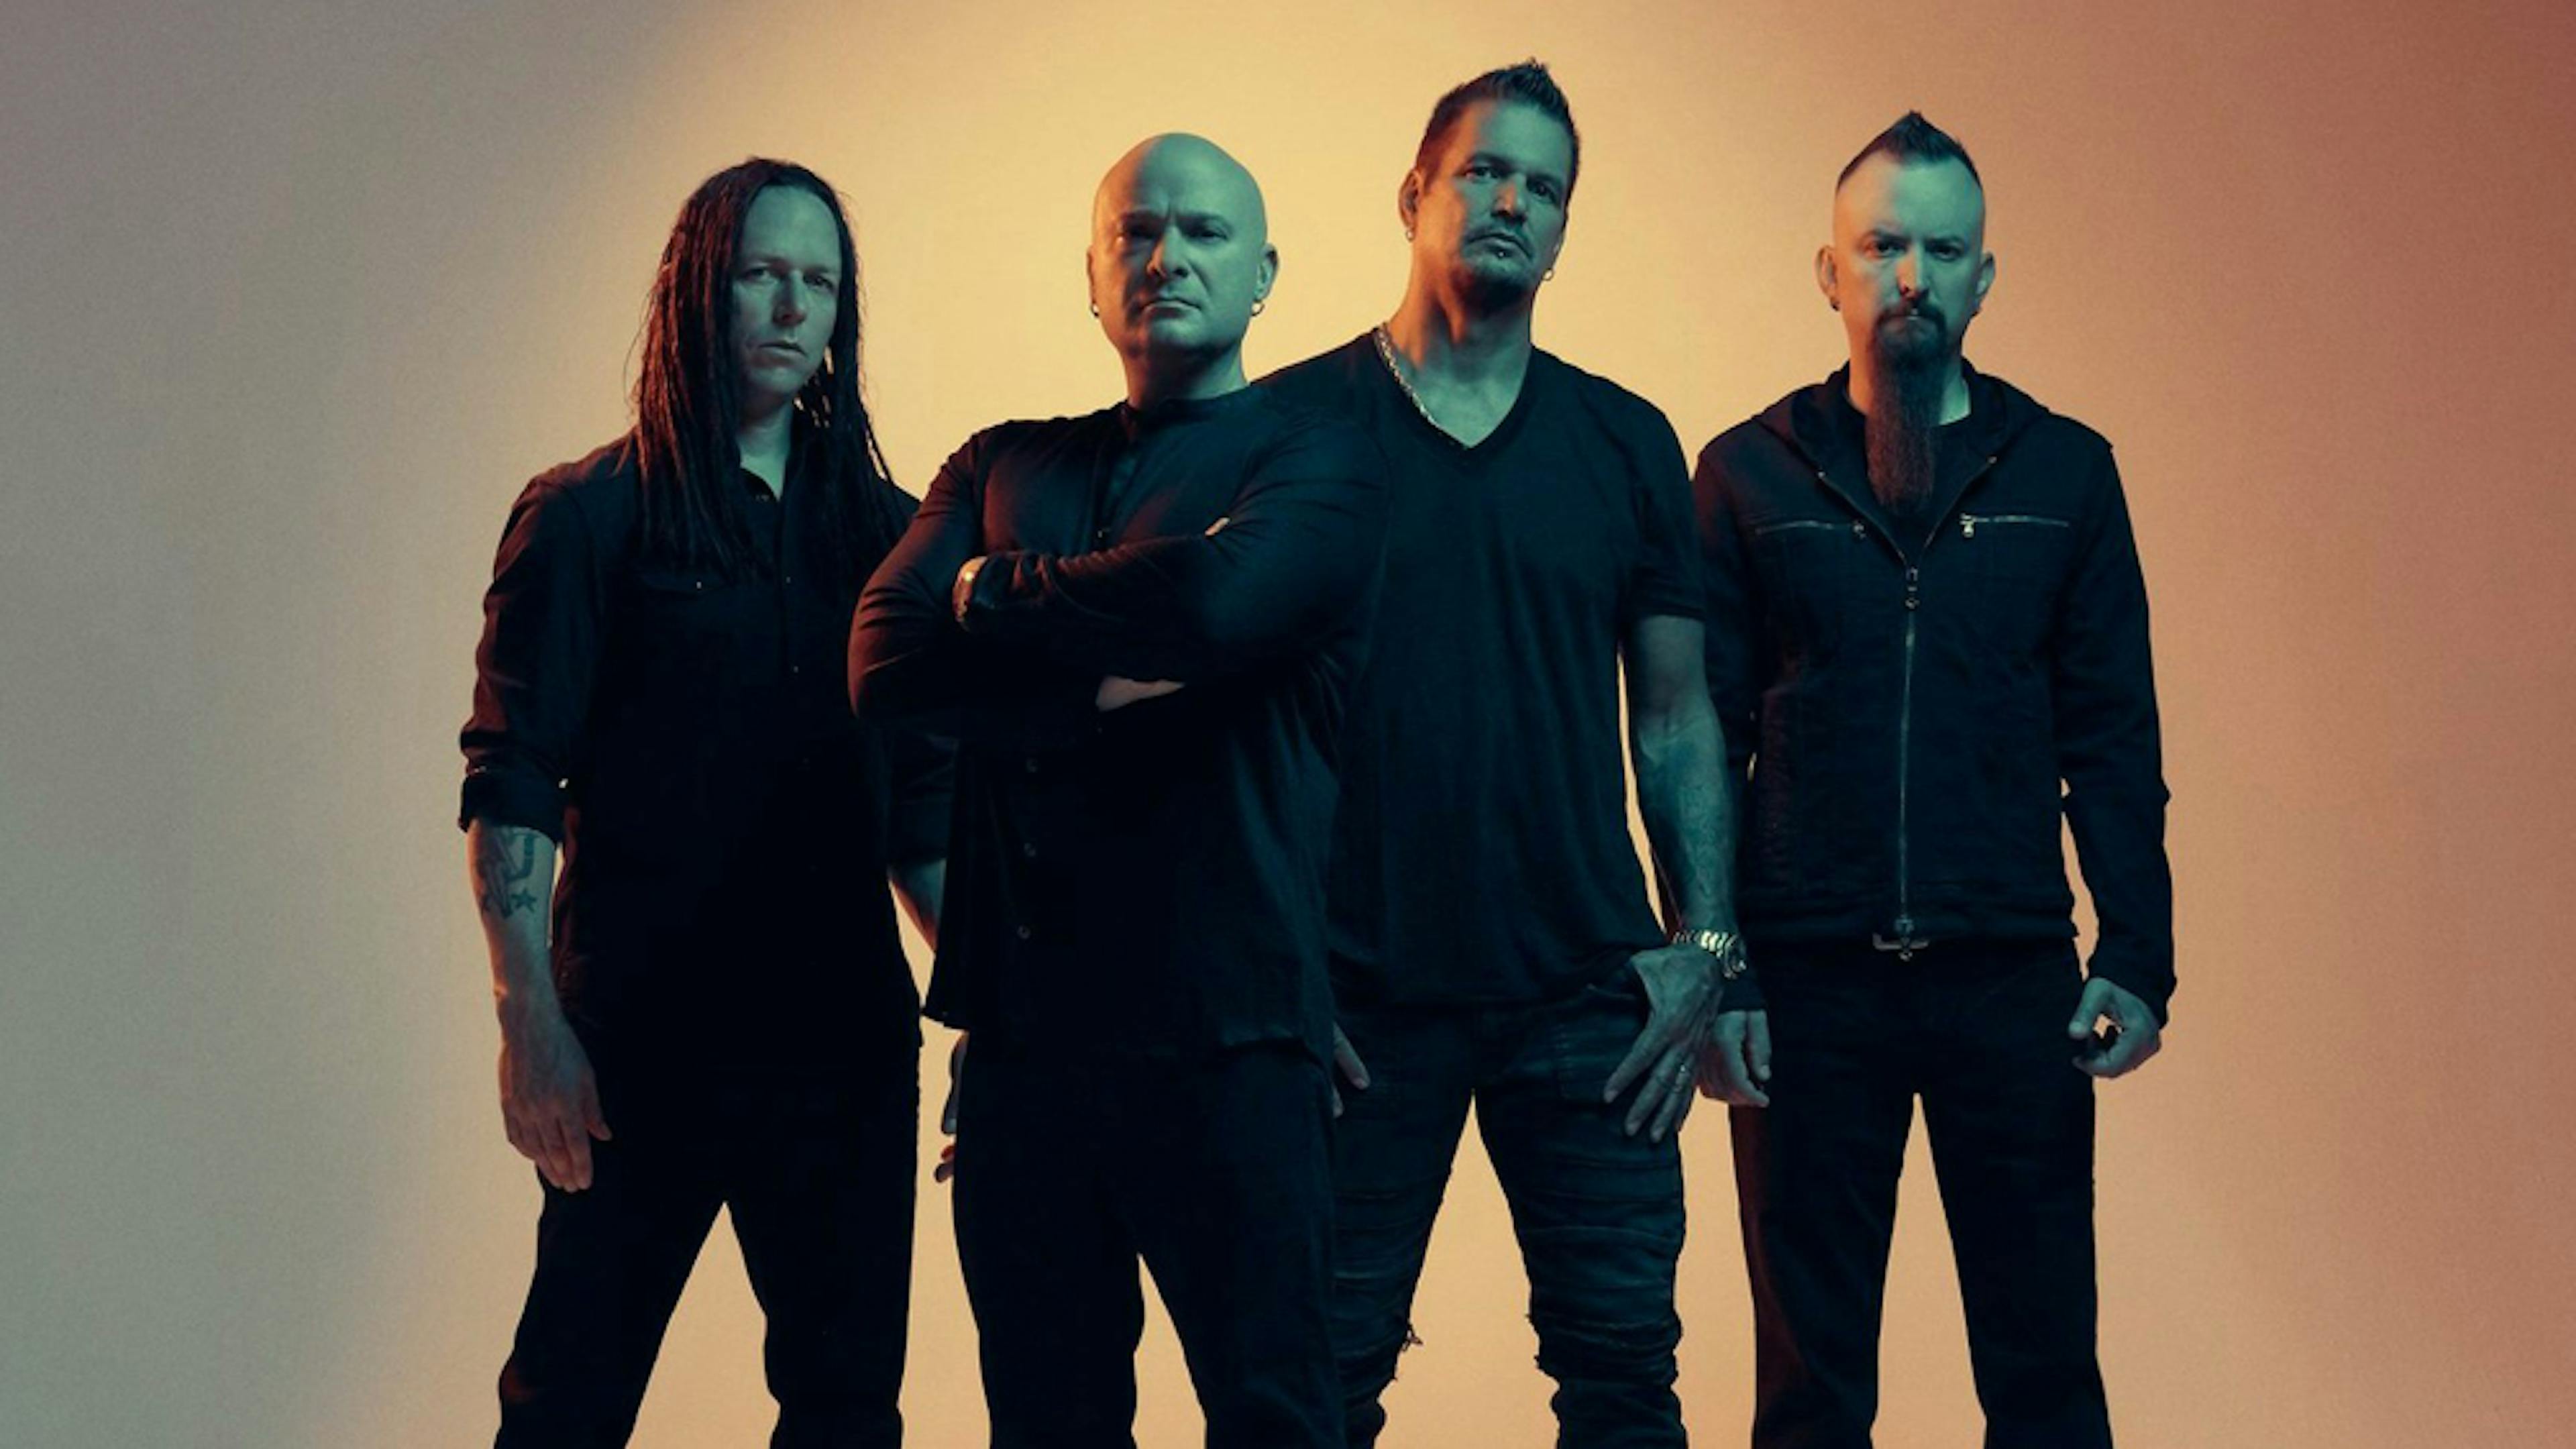 Disturbed Announce The Sickness 20th Anniversary Tour With Bad Wolves And Staind